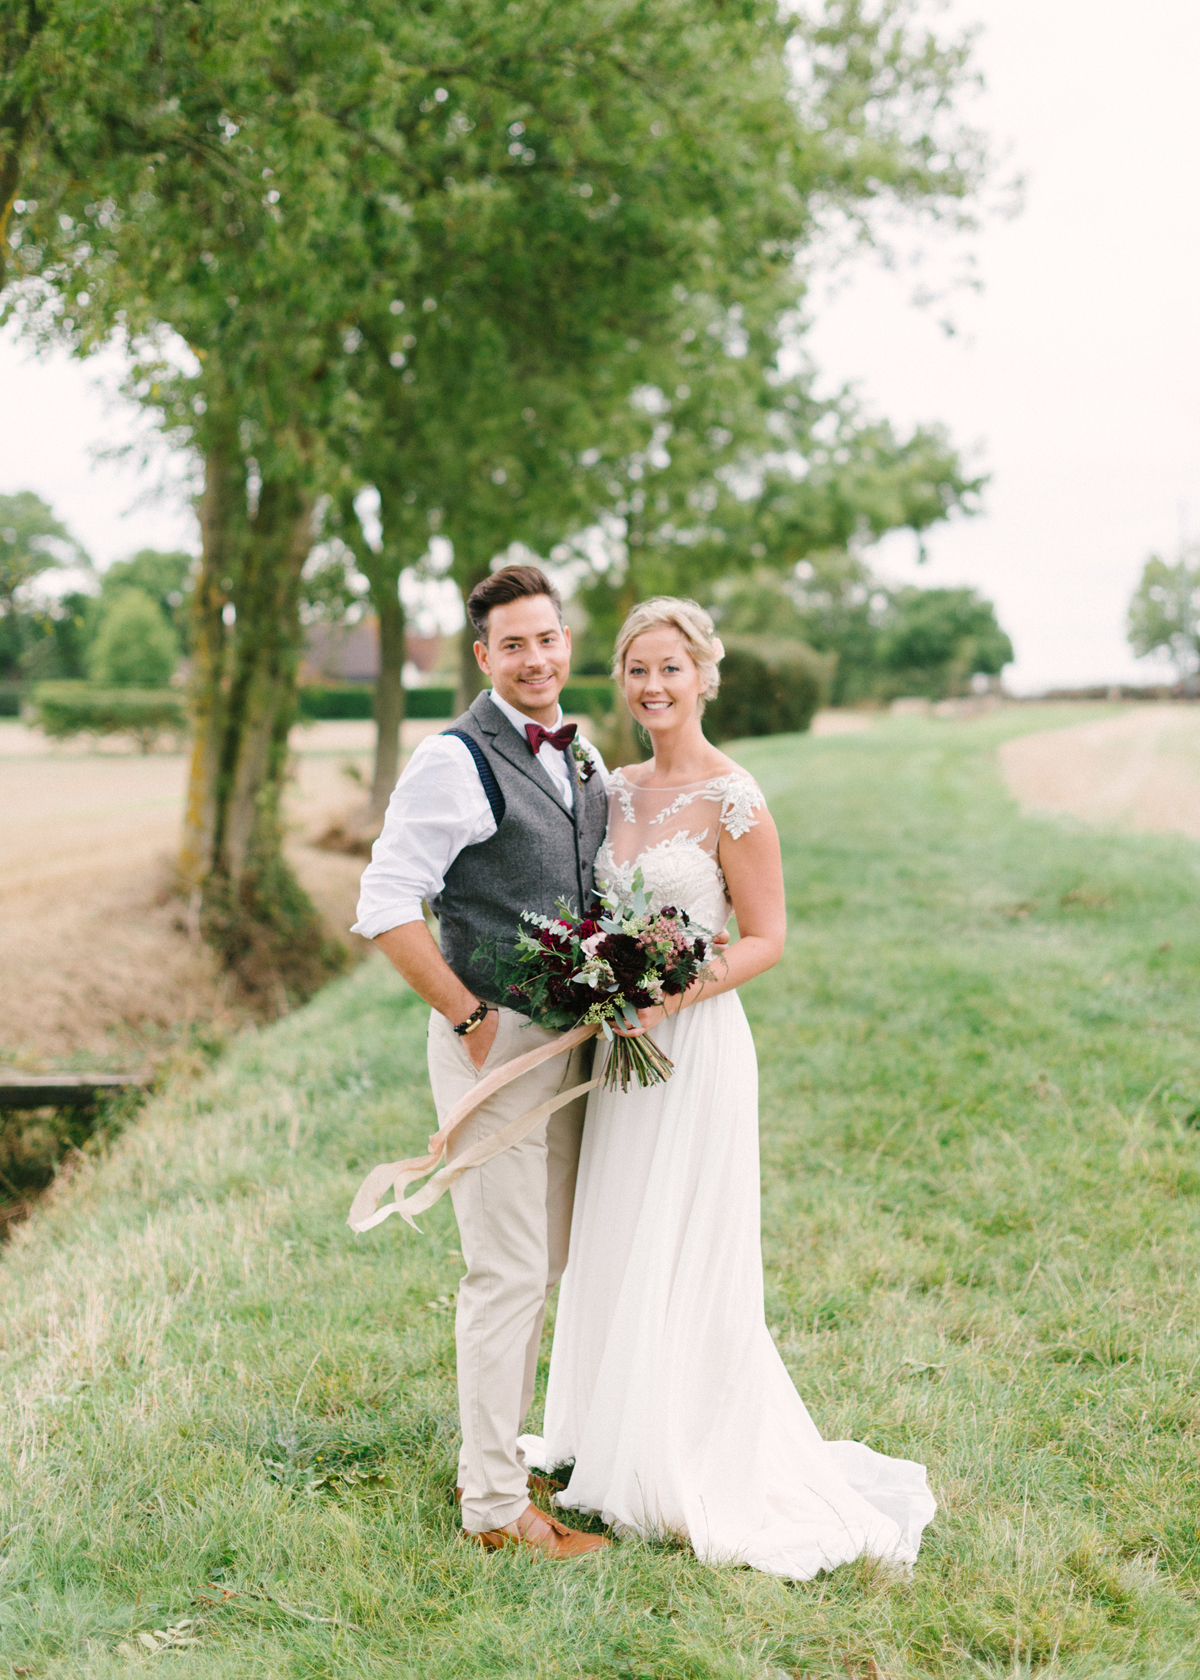 Katrina Otter Wedding planning and design - image by Hannah Duffy Photography